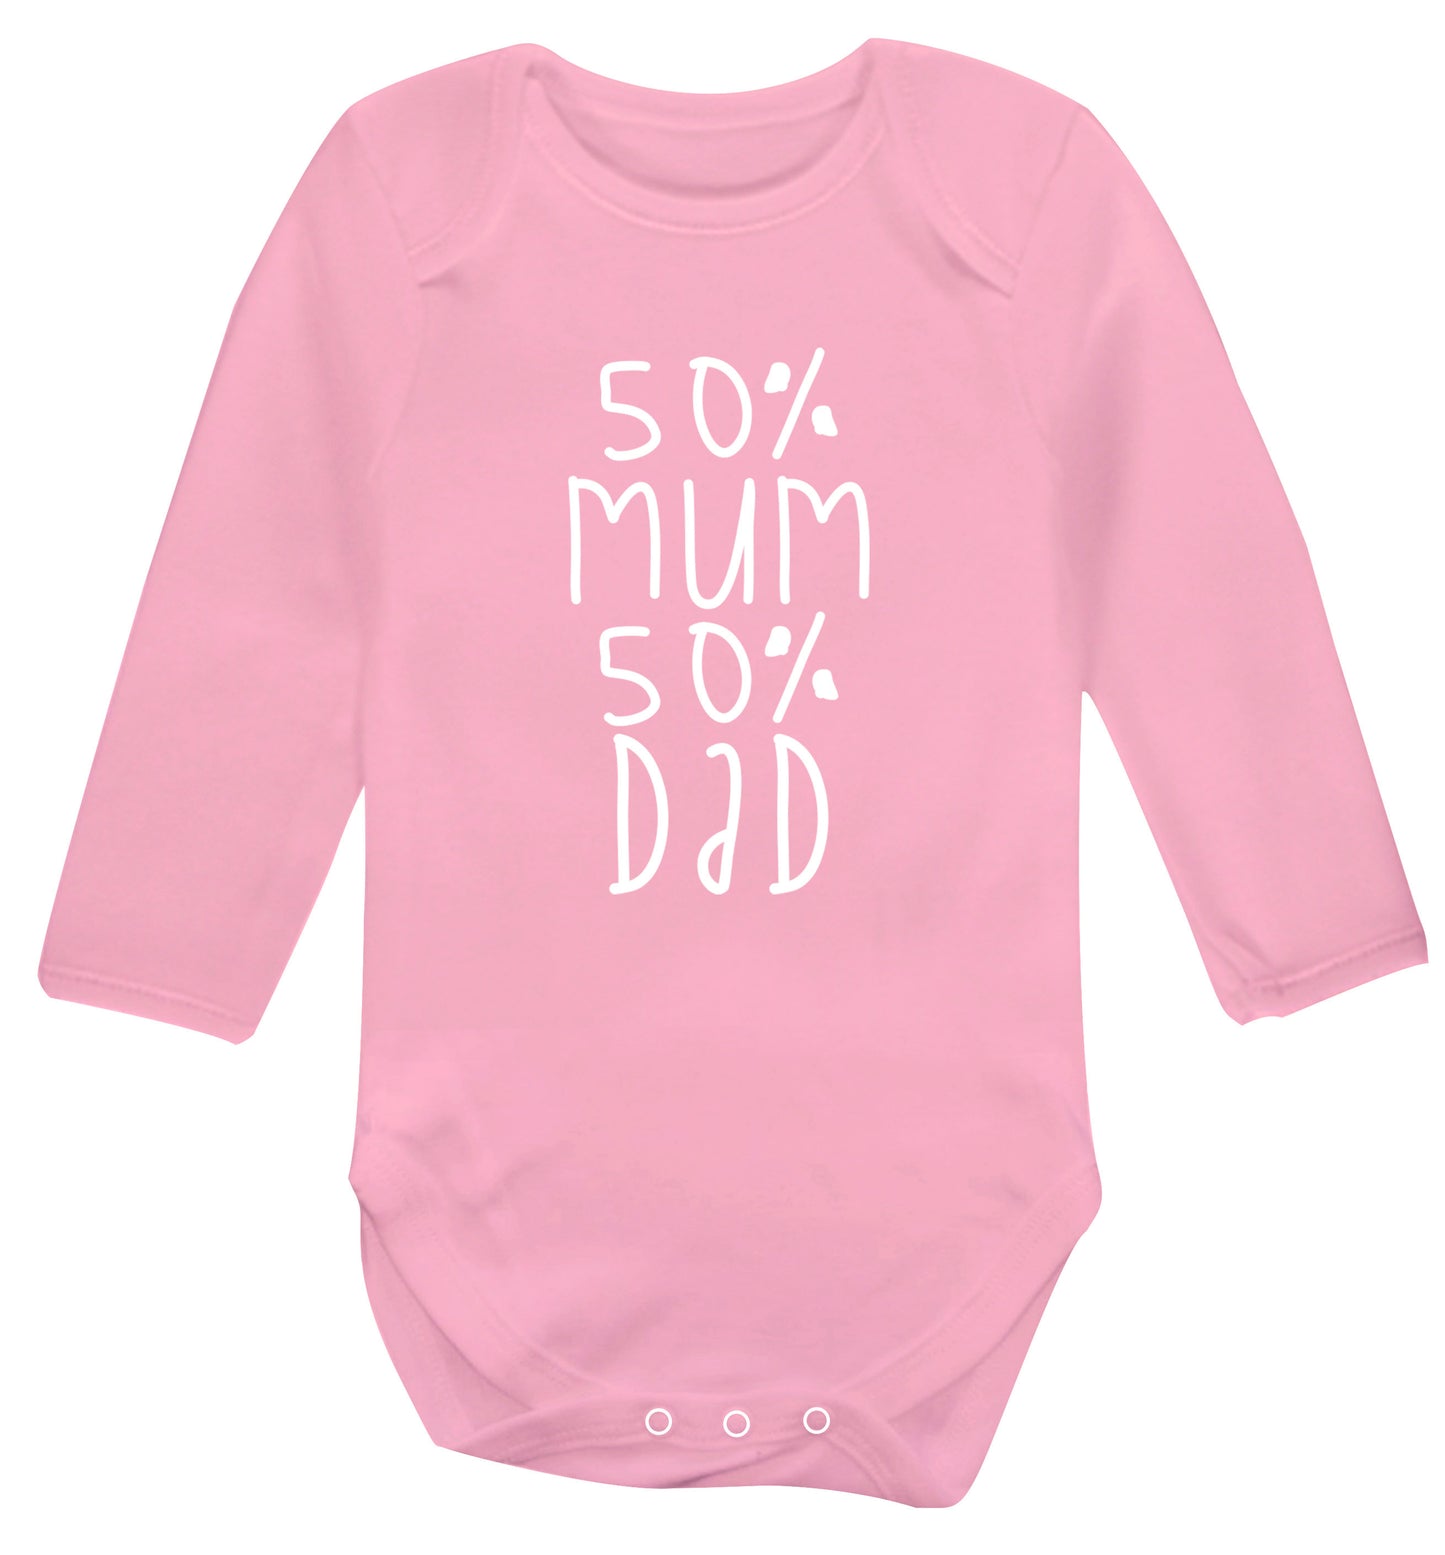 50% mum 50% dad Baby Vest long sleeved pale pink 6-12 months